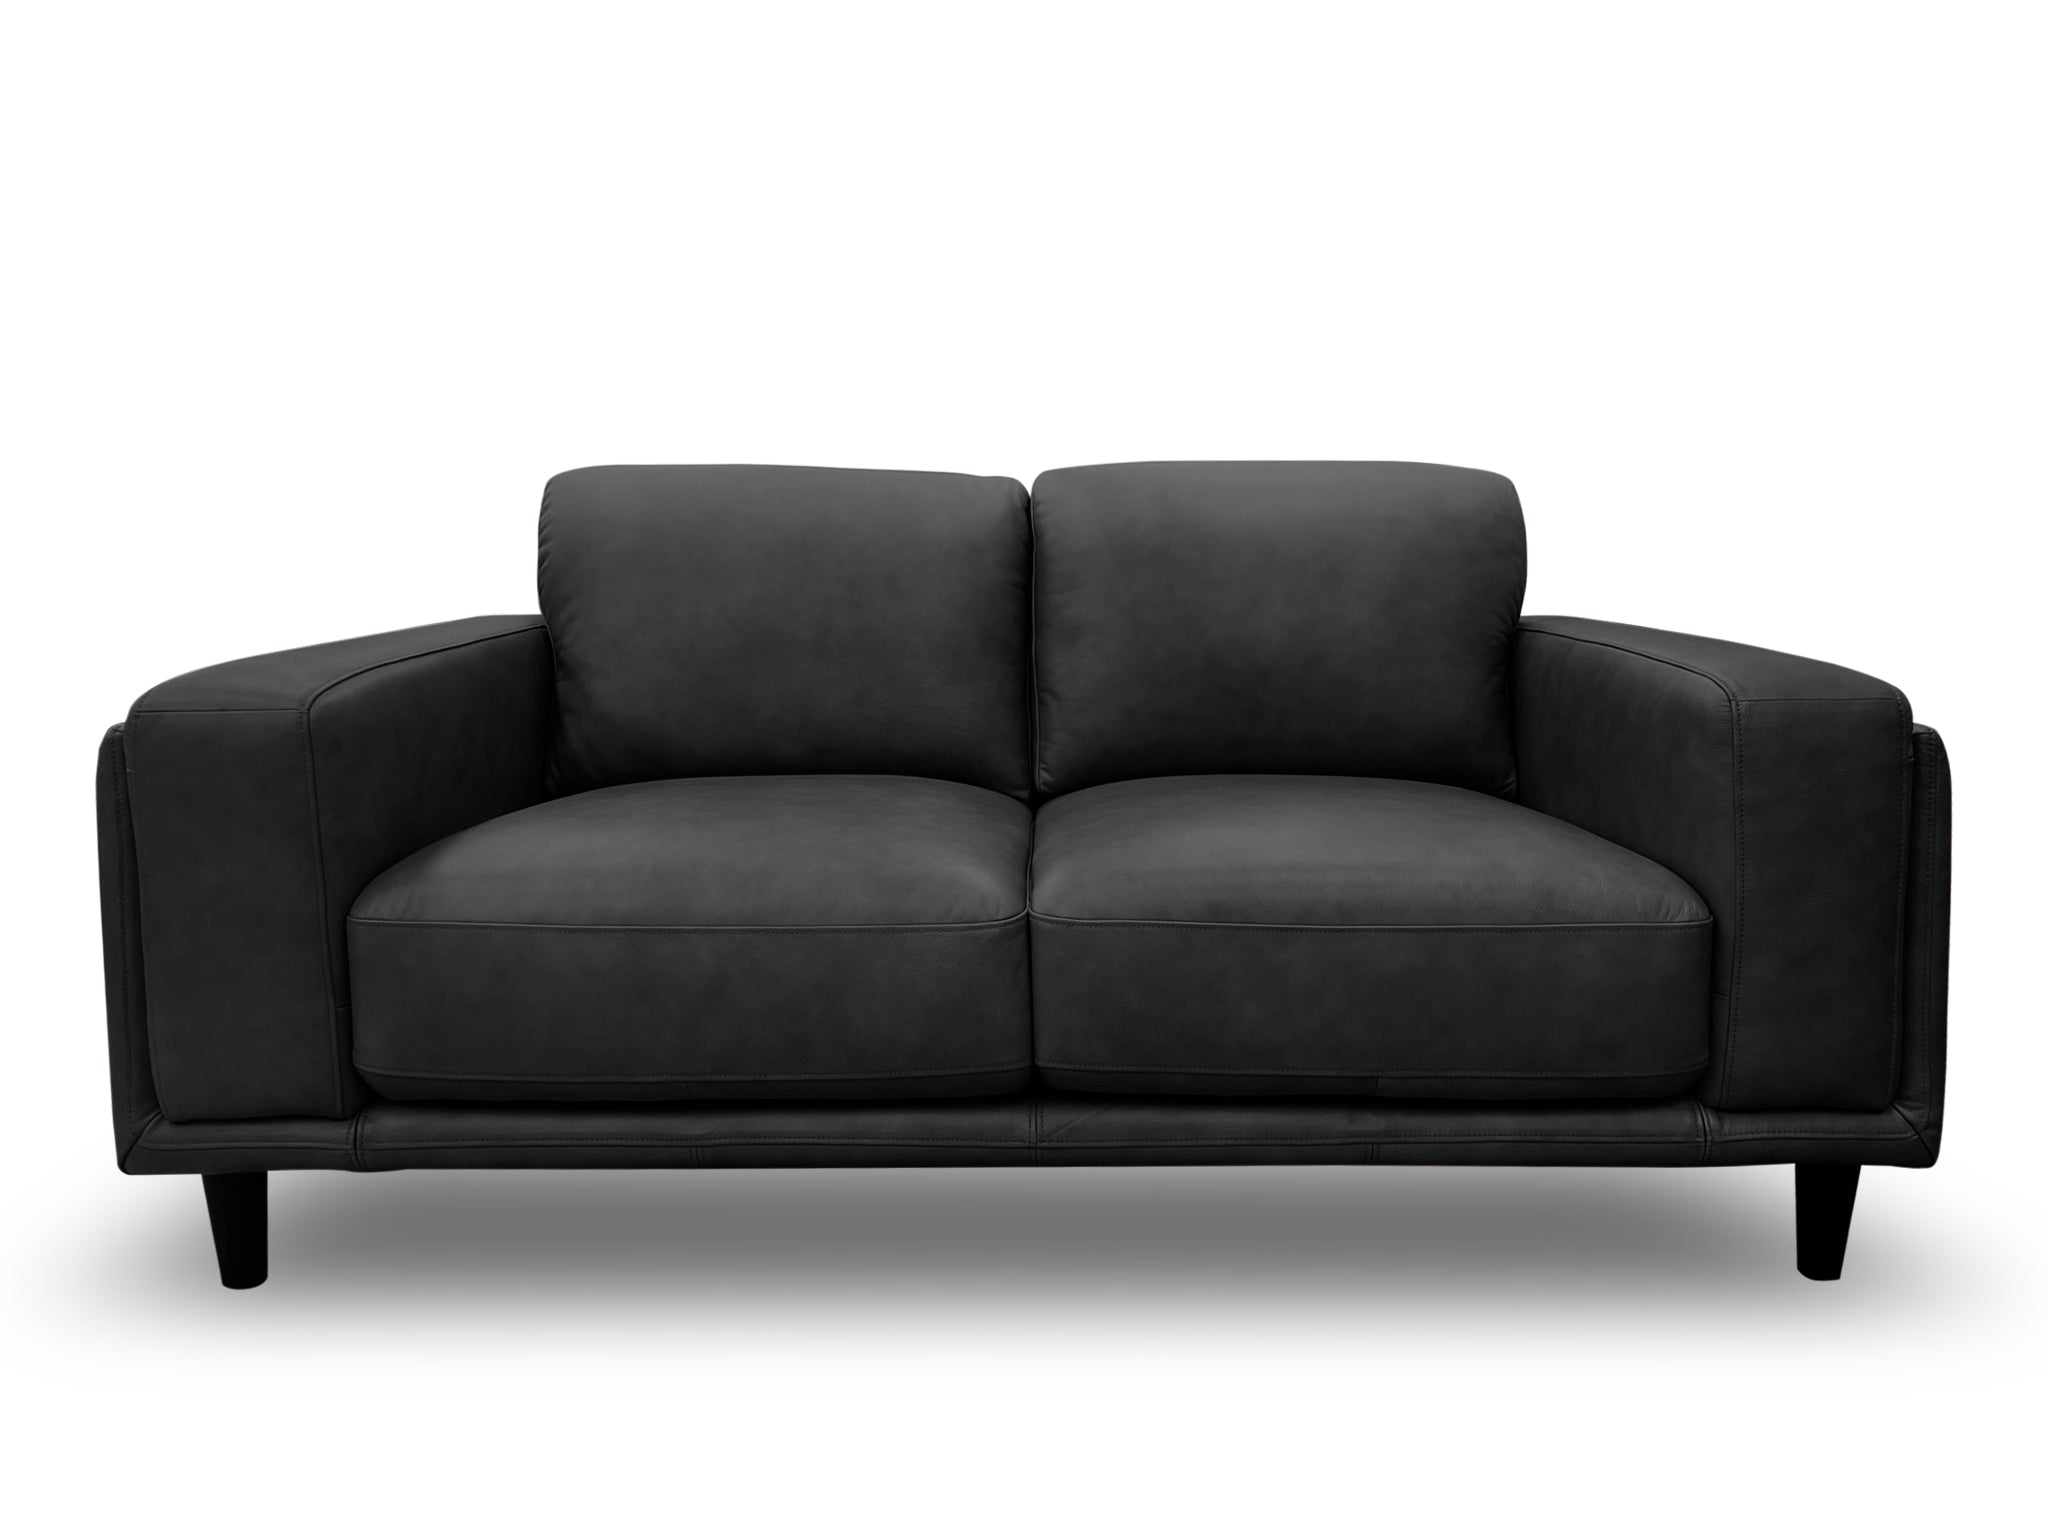 Daintree 2 seater sofa in charcoal leather